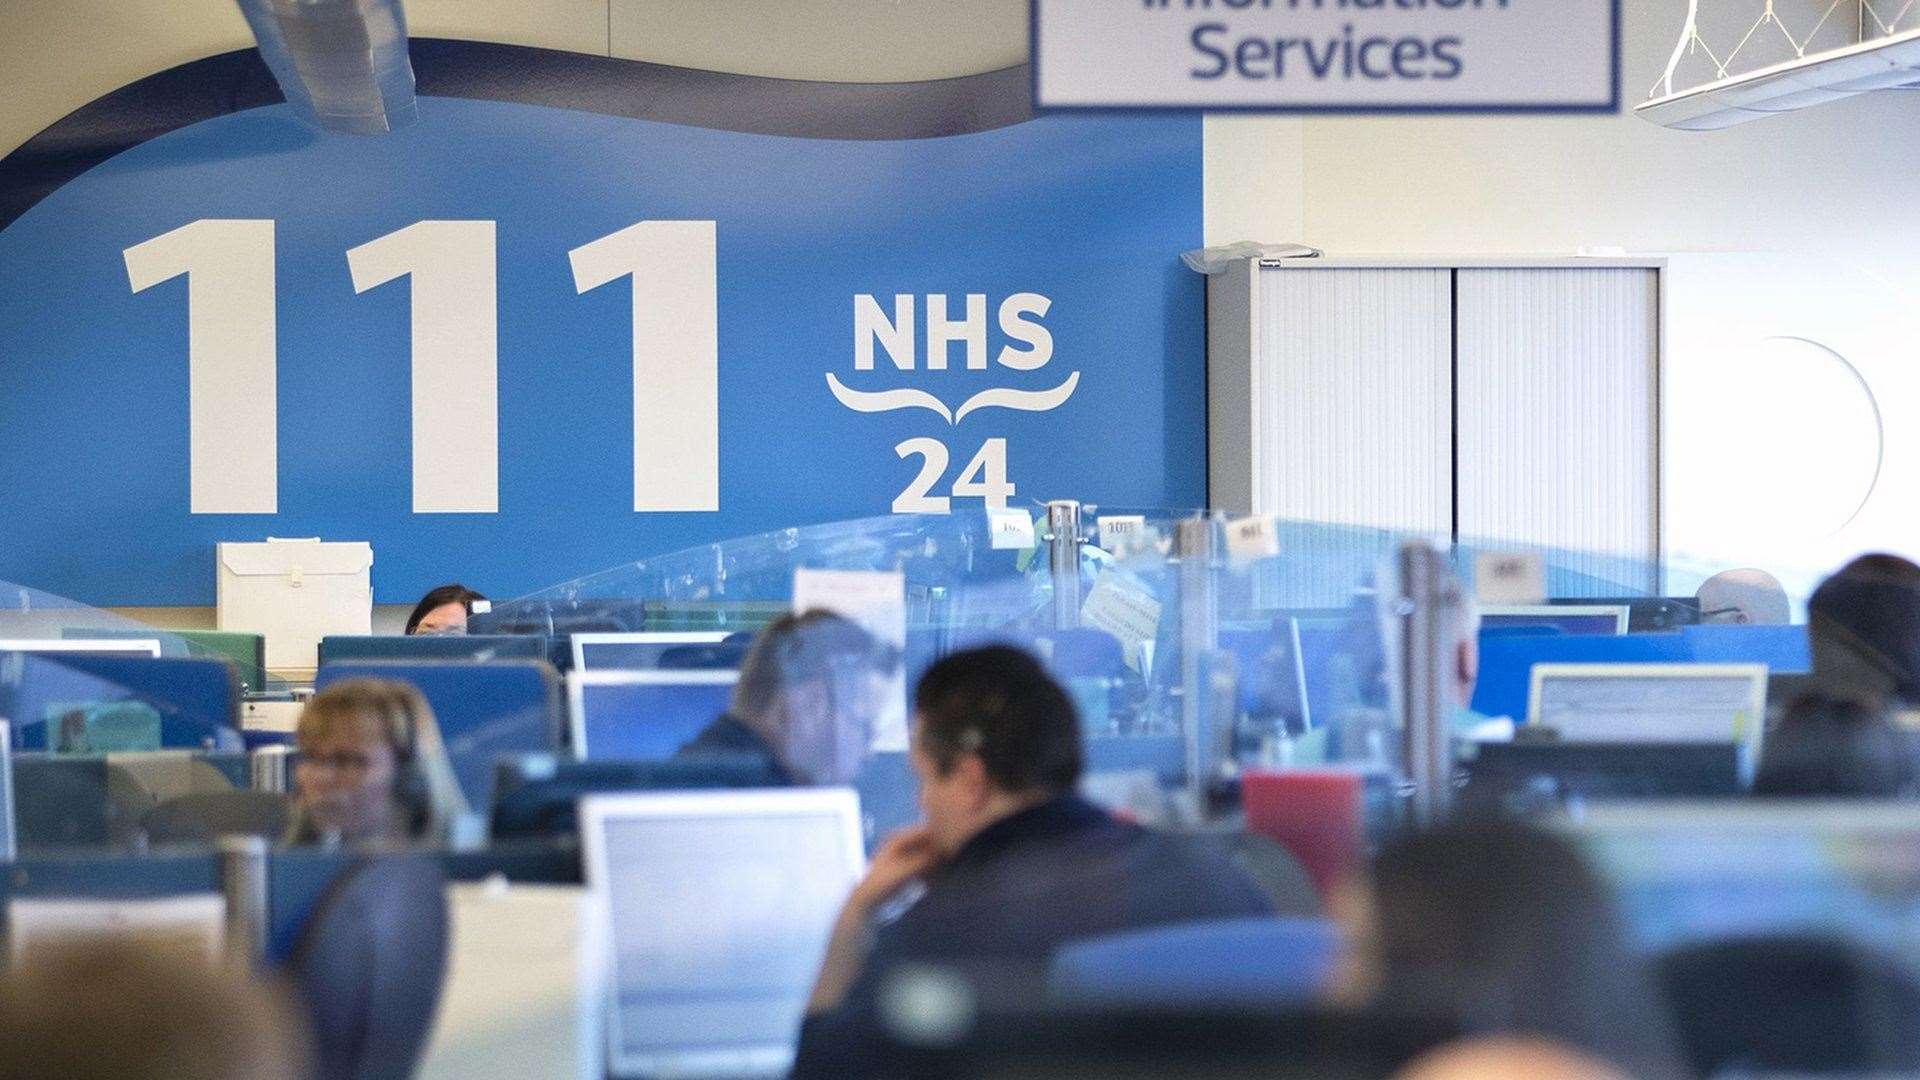 NHS 24’s 111 service is always busy over the holiday period.